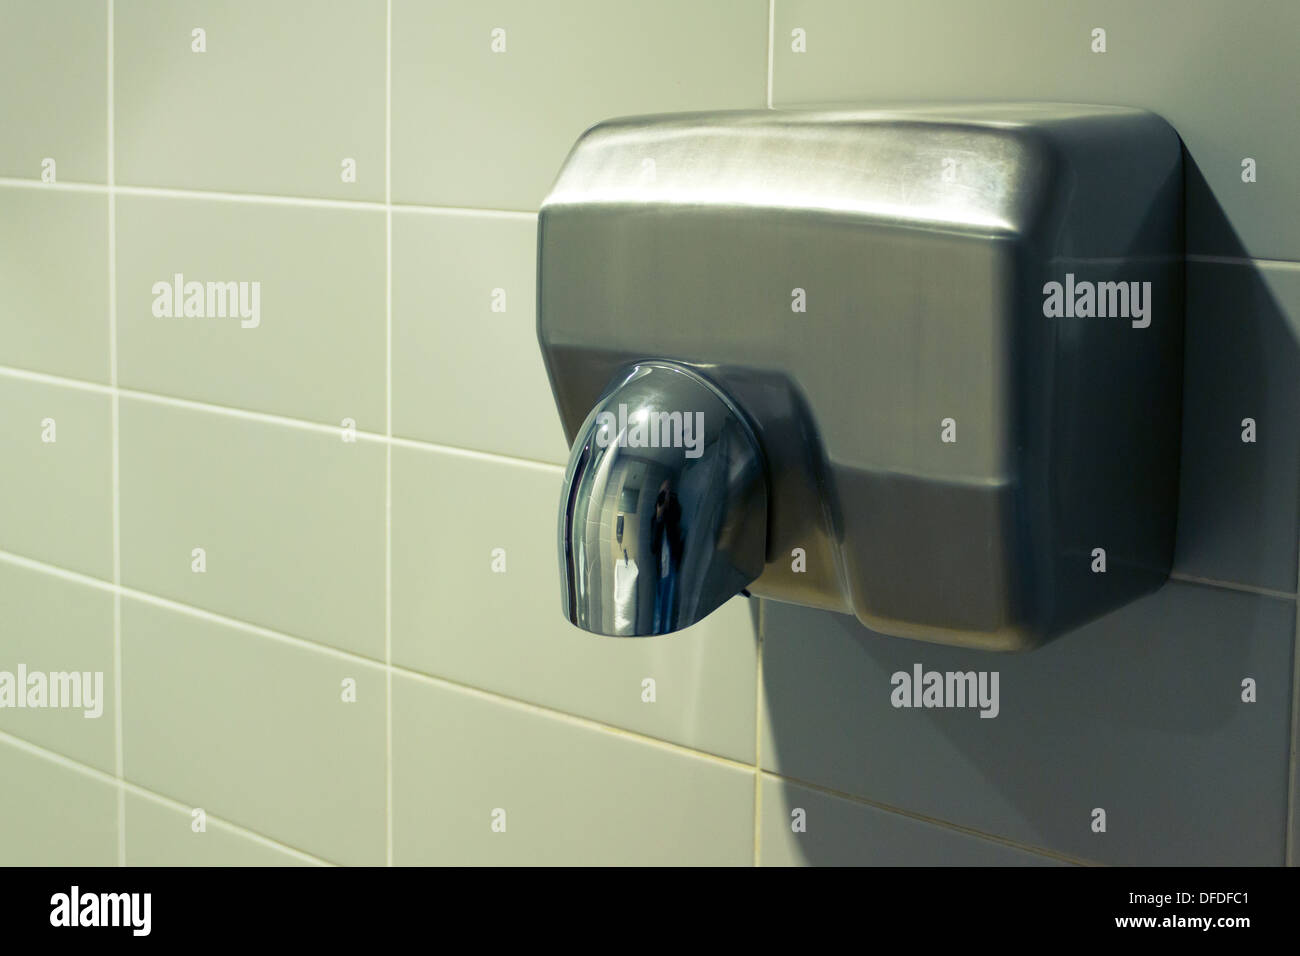 Silver hand dryer on a grey tiled wall Stock Photo